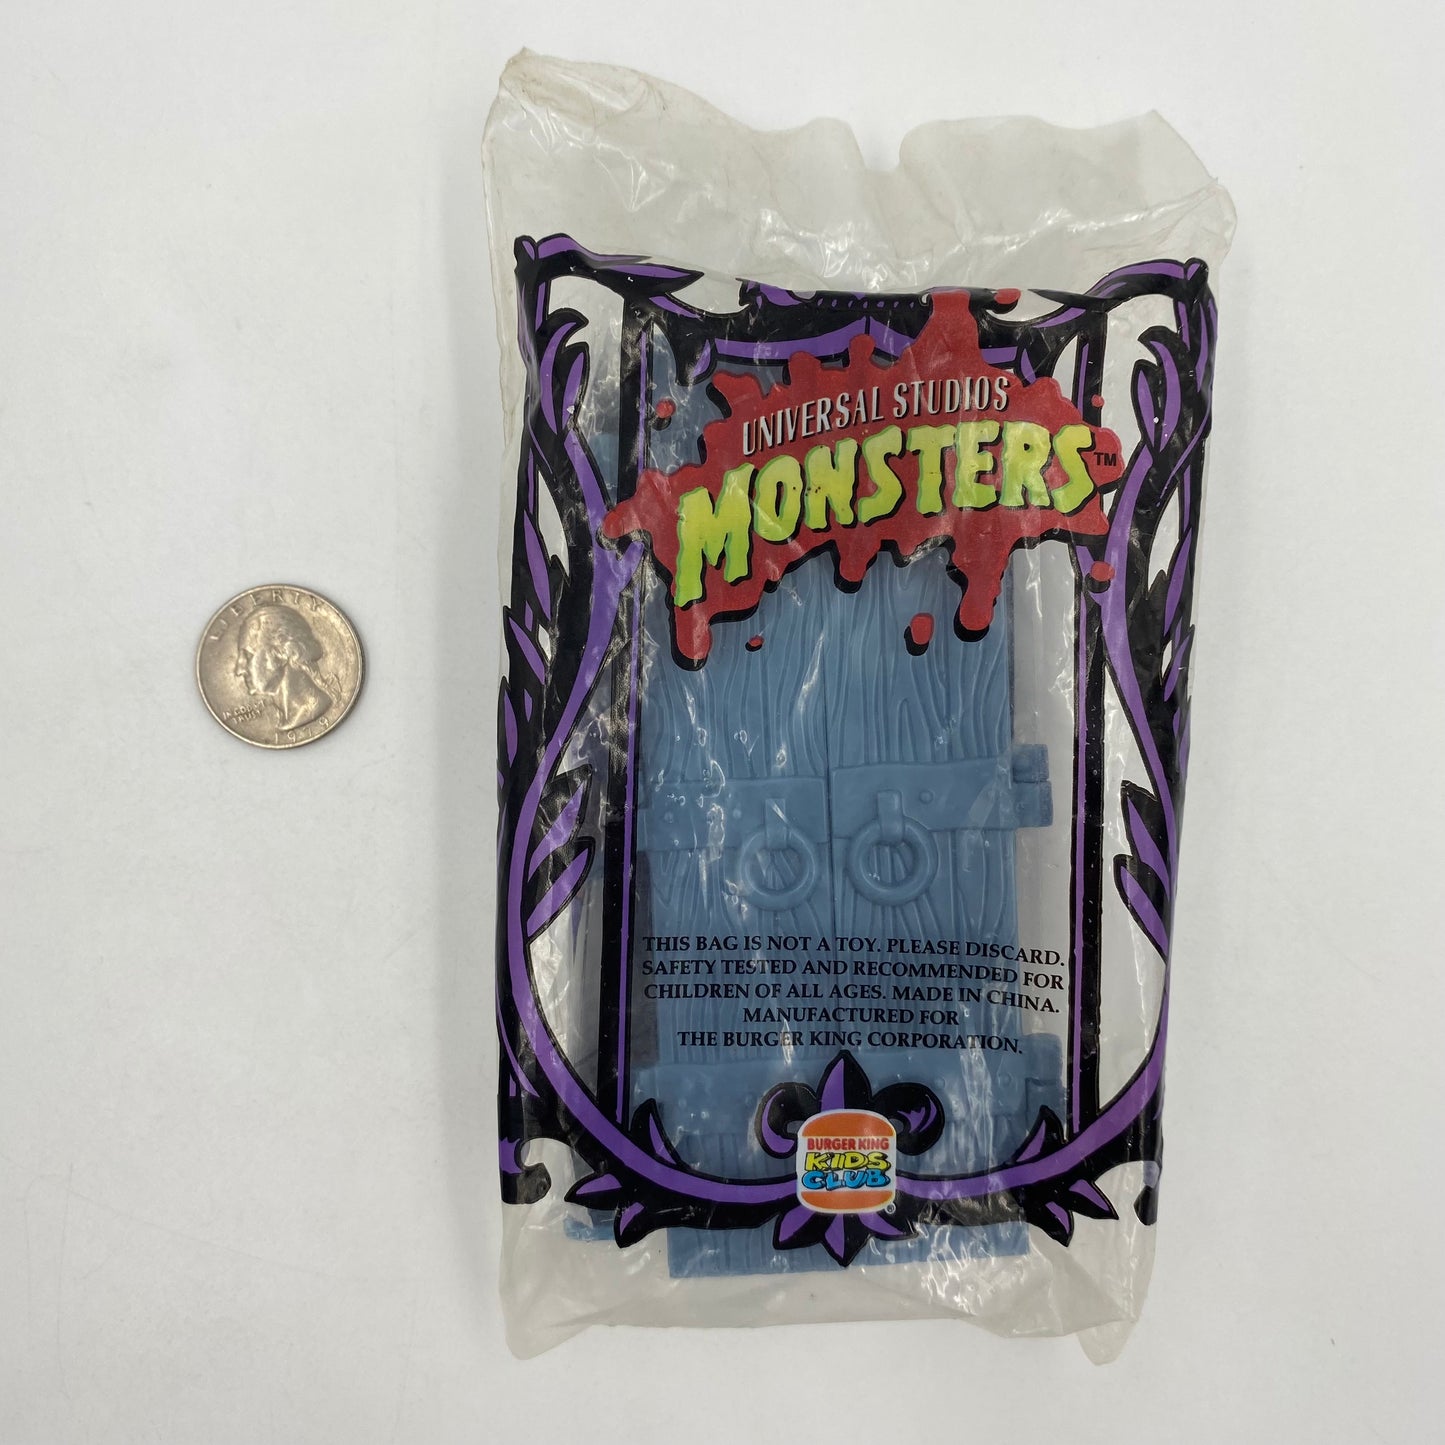 Universal Studios Monsters The Wolf Man action figure Burger King Kids' Meals toy (1997) bagged